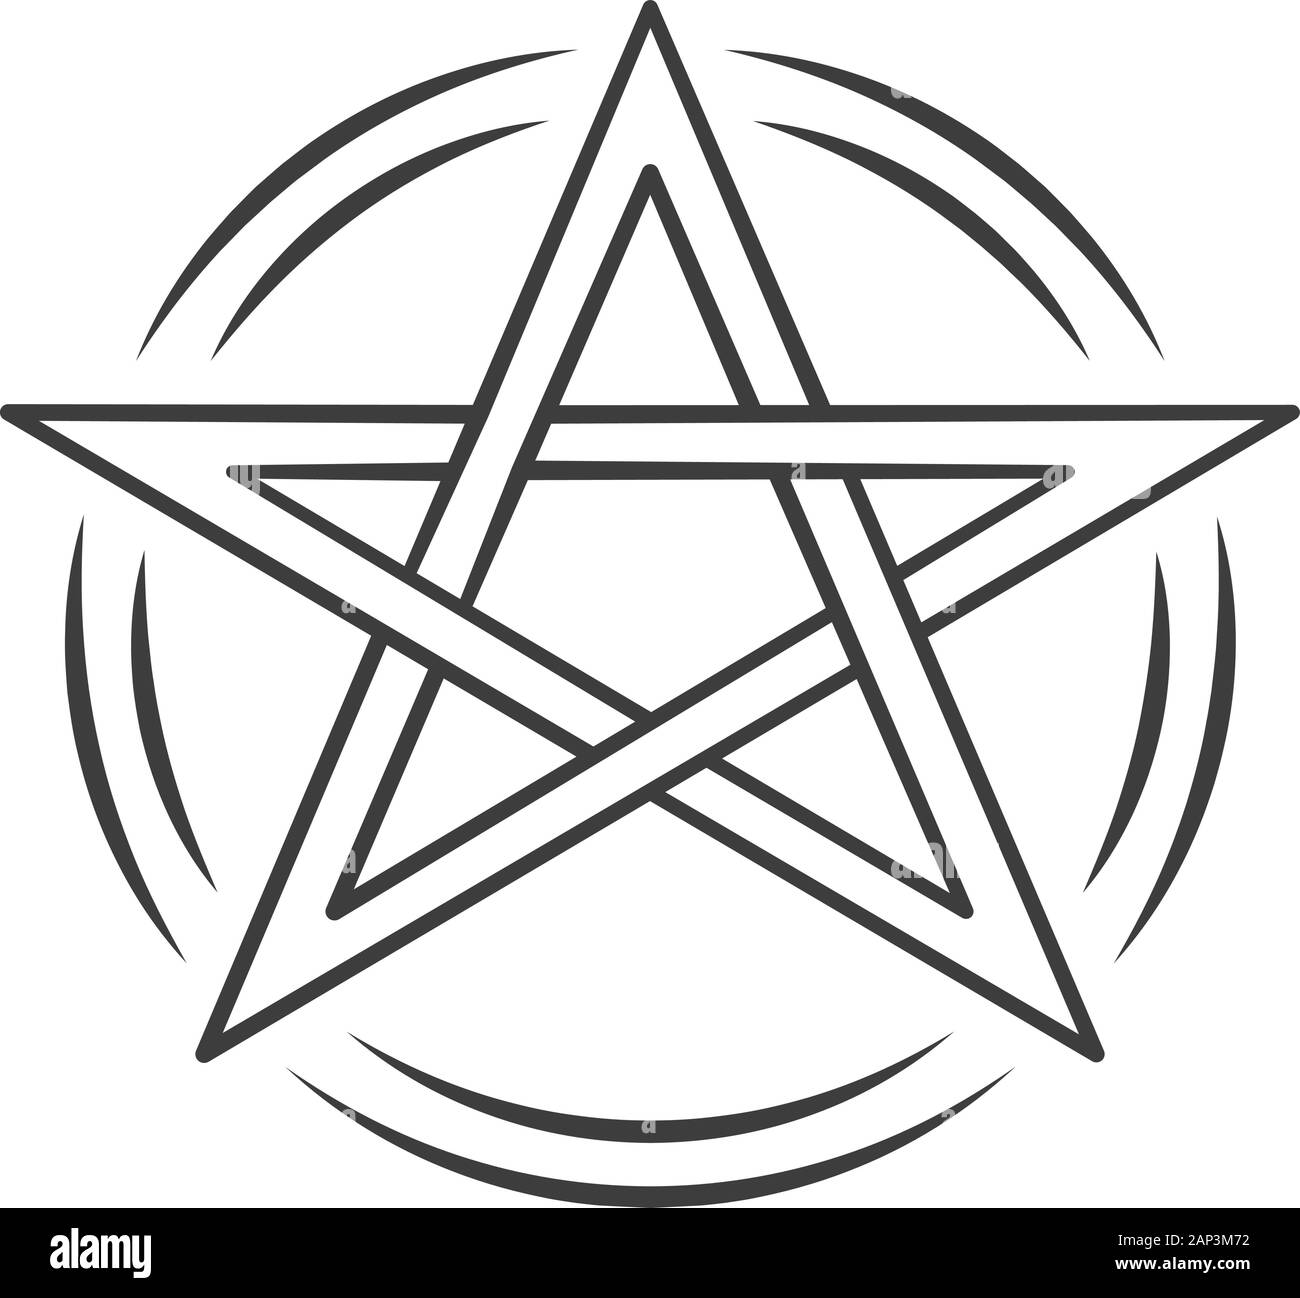 Pentagram linear icon. Thin line illustration. Occult ritual pentacle. Devil star. Satanic cult, wiccan & pagan symbol. Witchcraft, esoteric sign. Vec Stock Vector